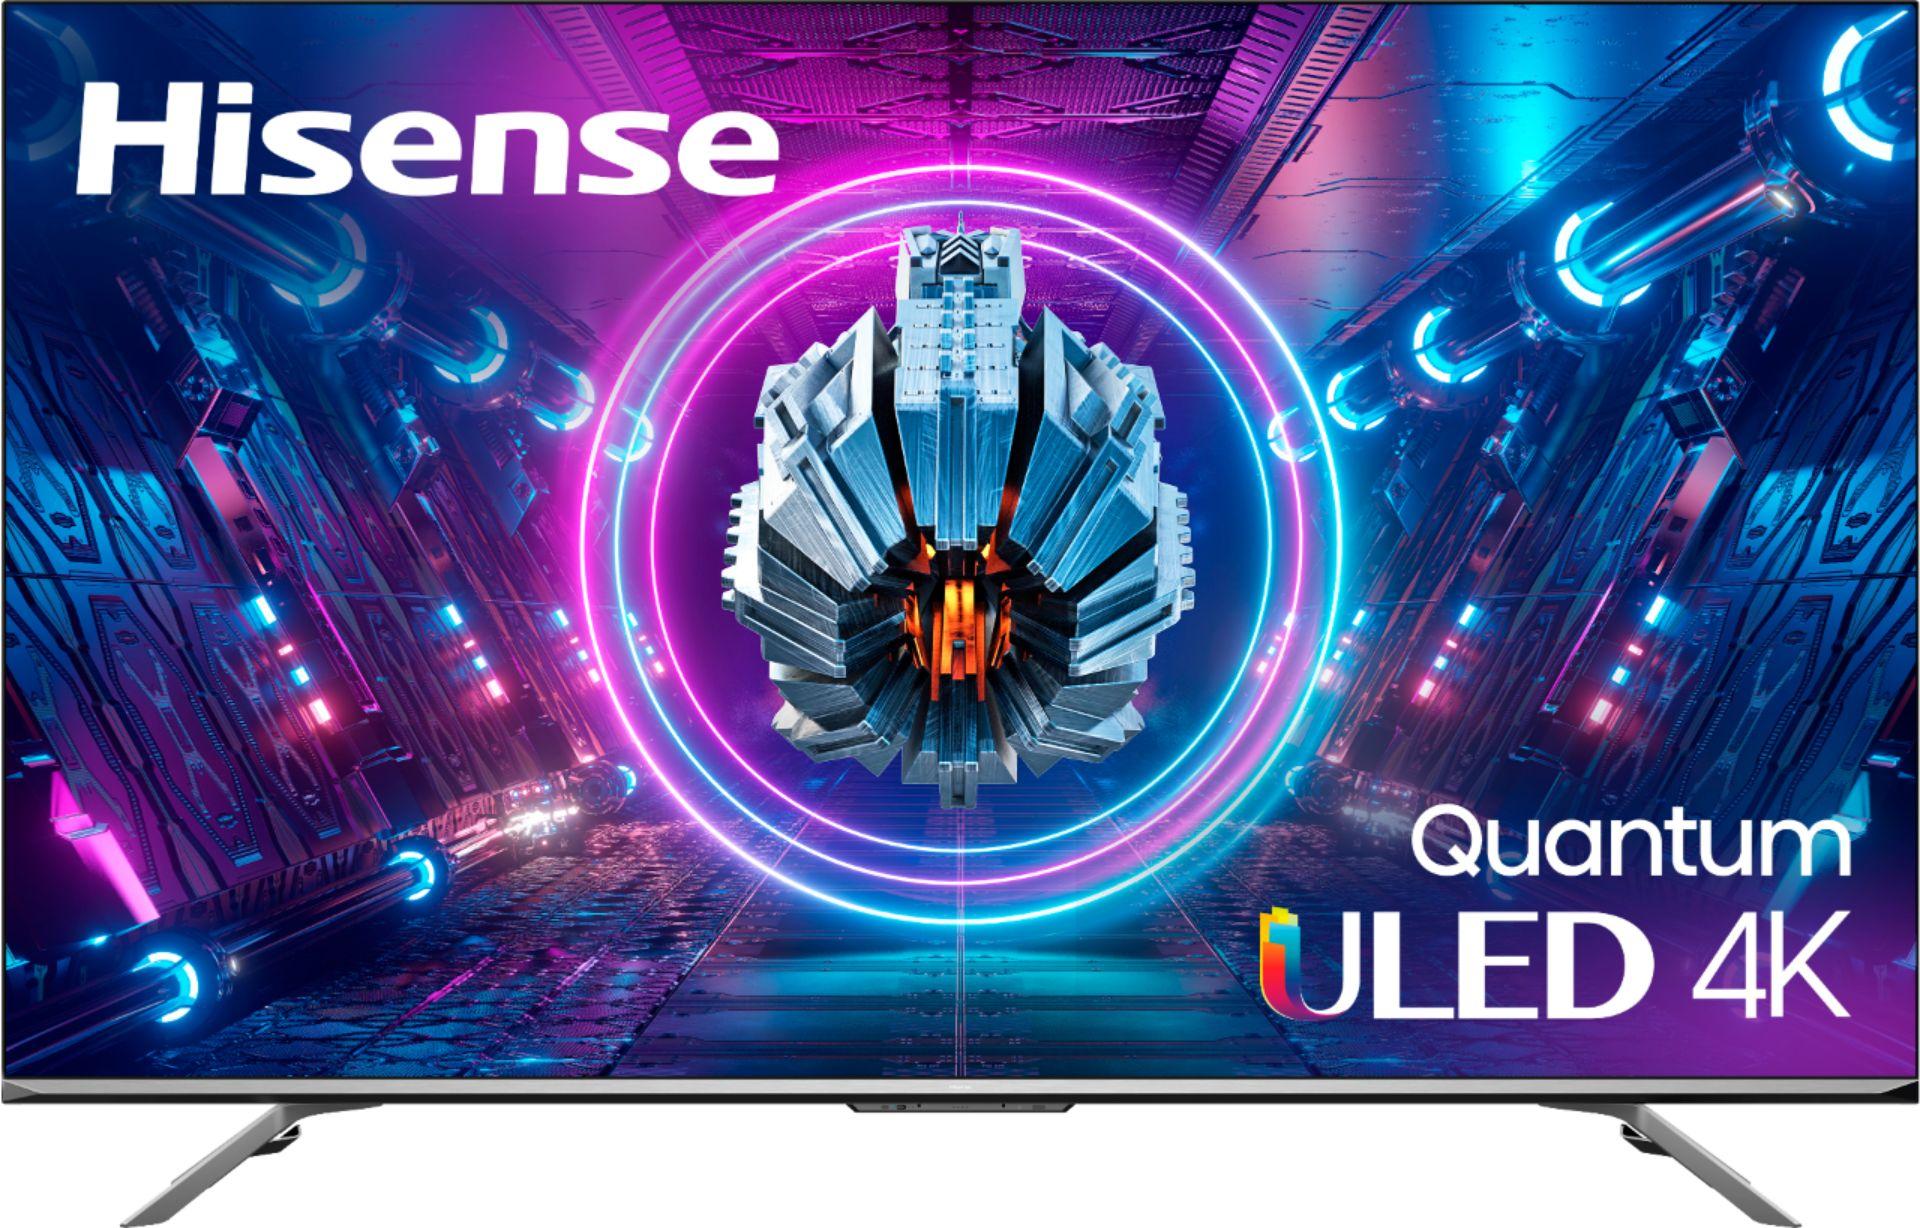 Hisense 65in U7G Series Quantum ULED 4K Android TV for $799.99 Shipped